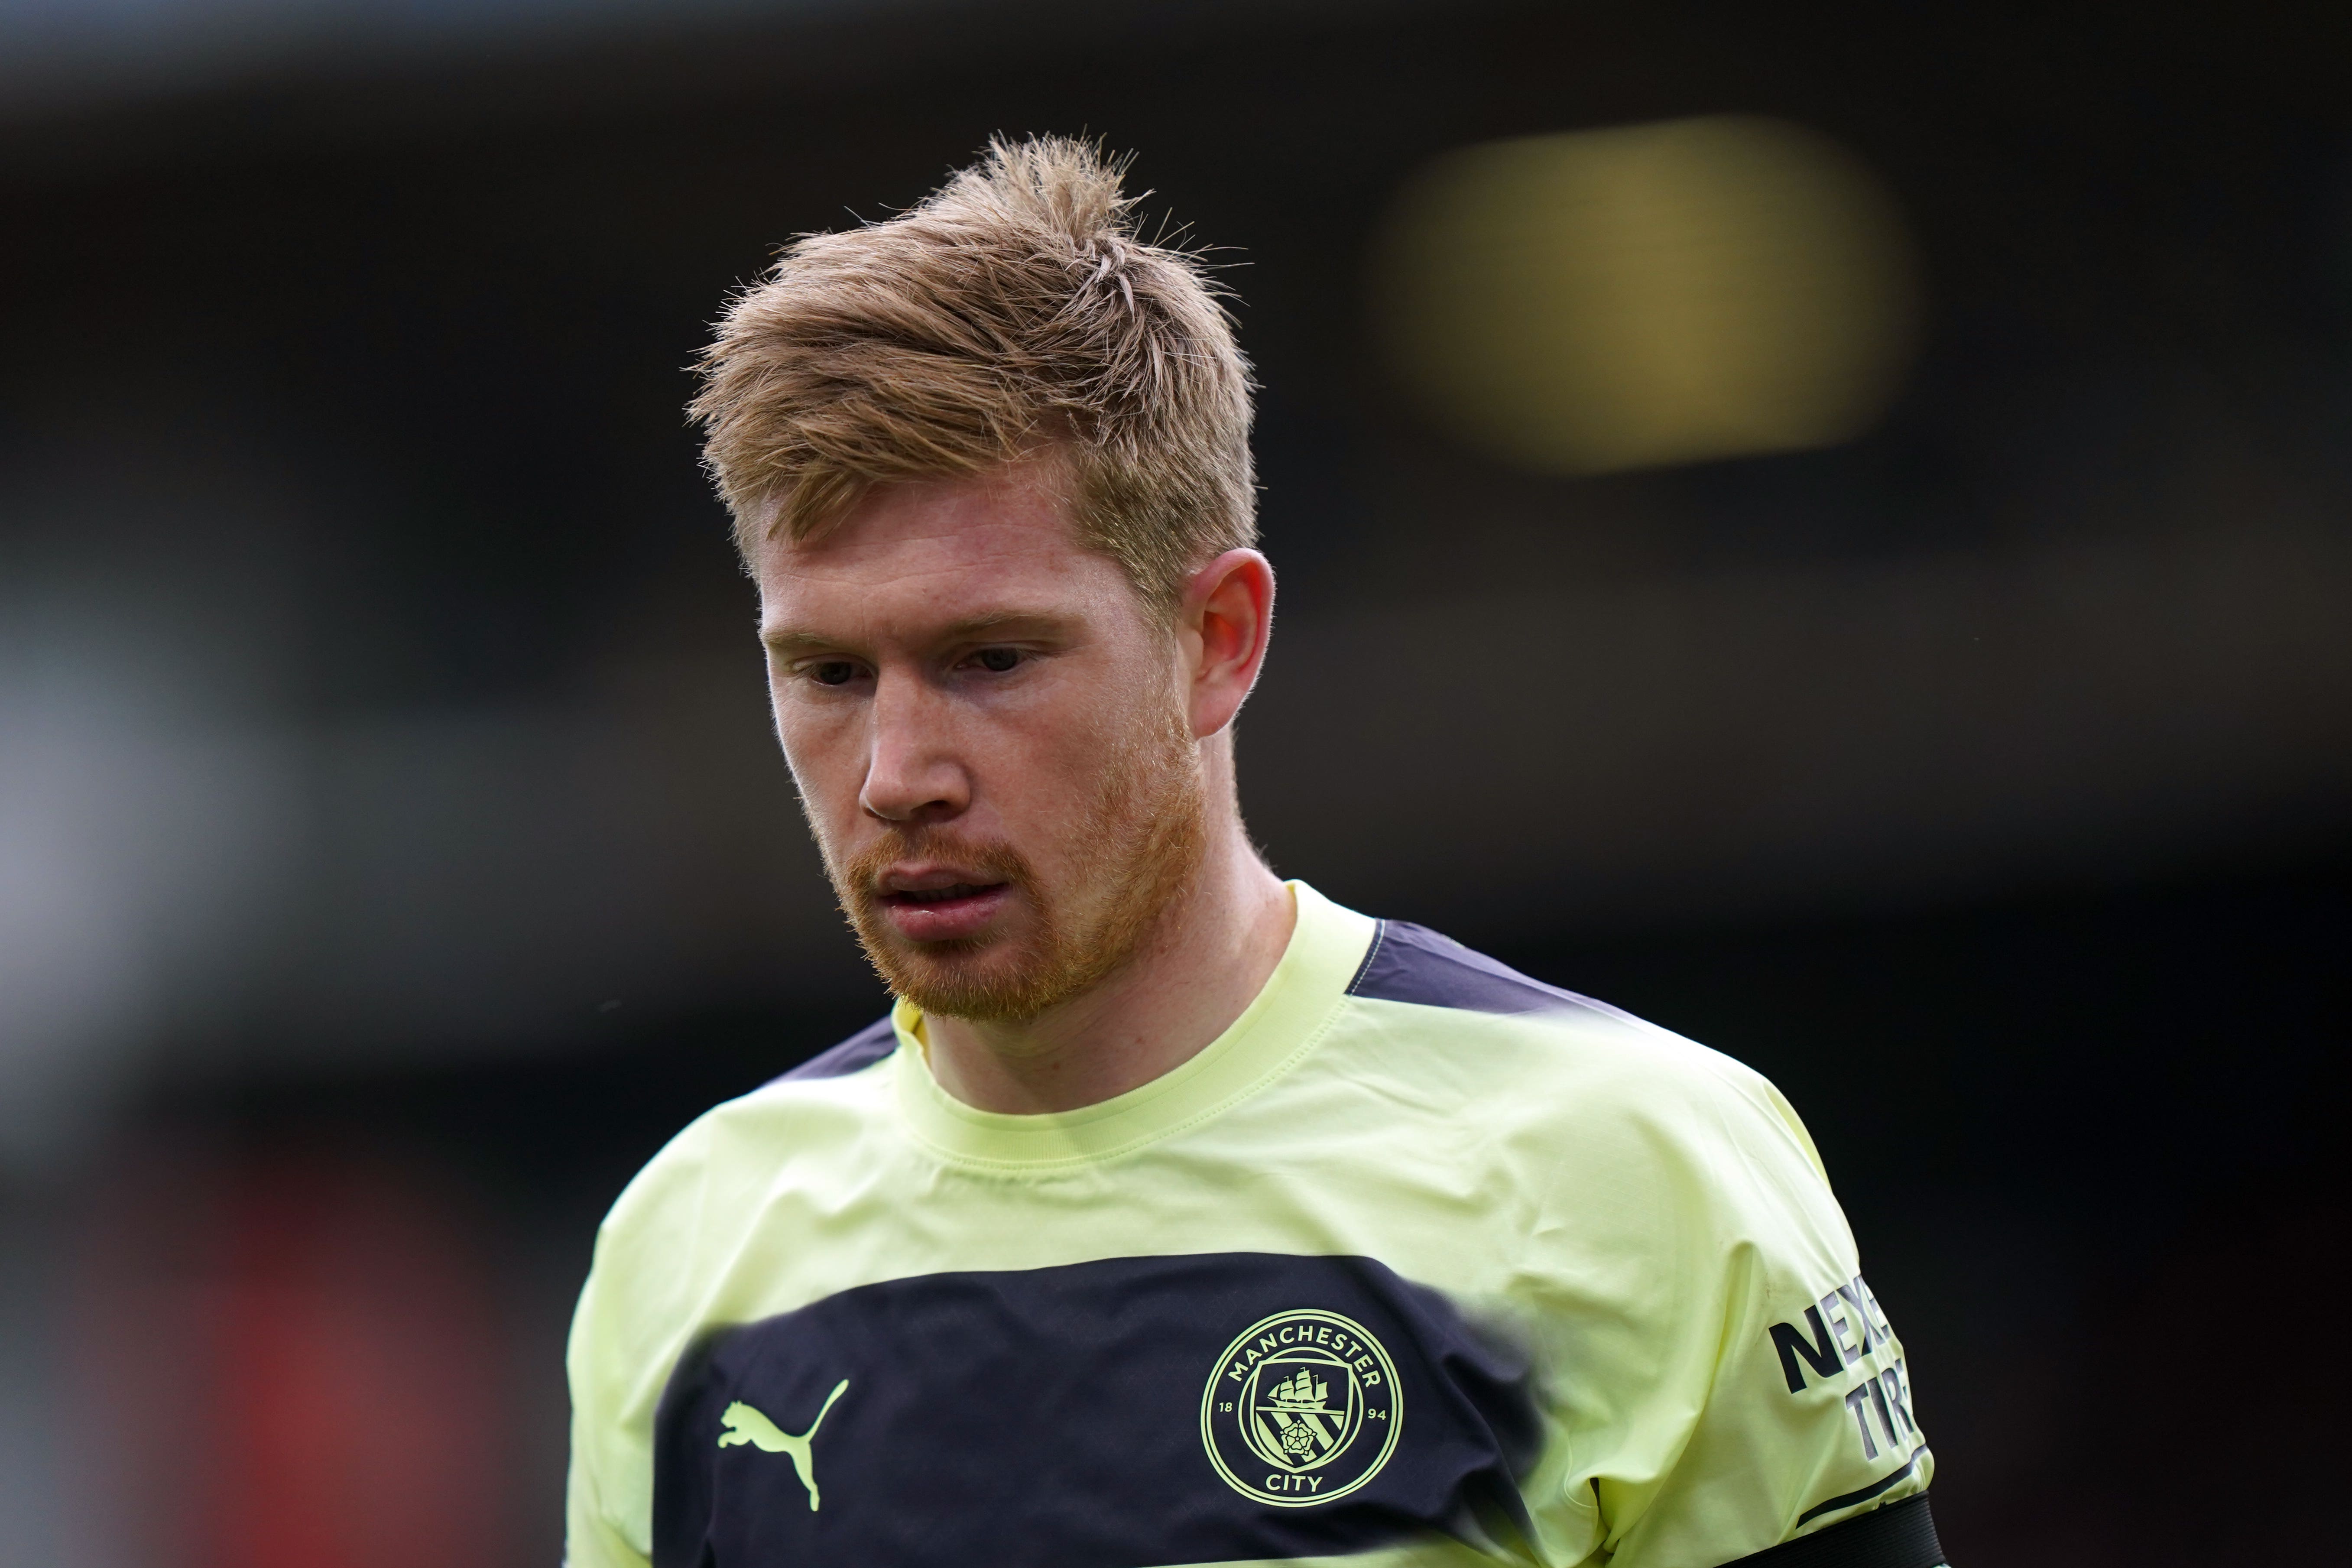 Kevin De Bruyne missed Manchester City’s training session prior to their Champions League game at RB Leipzig (Tim Goode/PA)